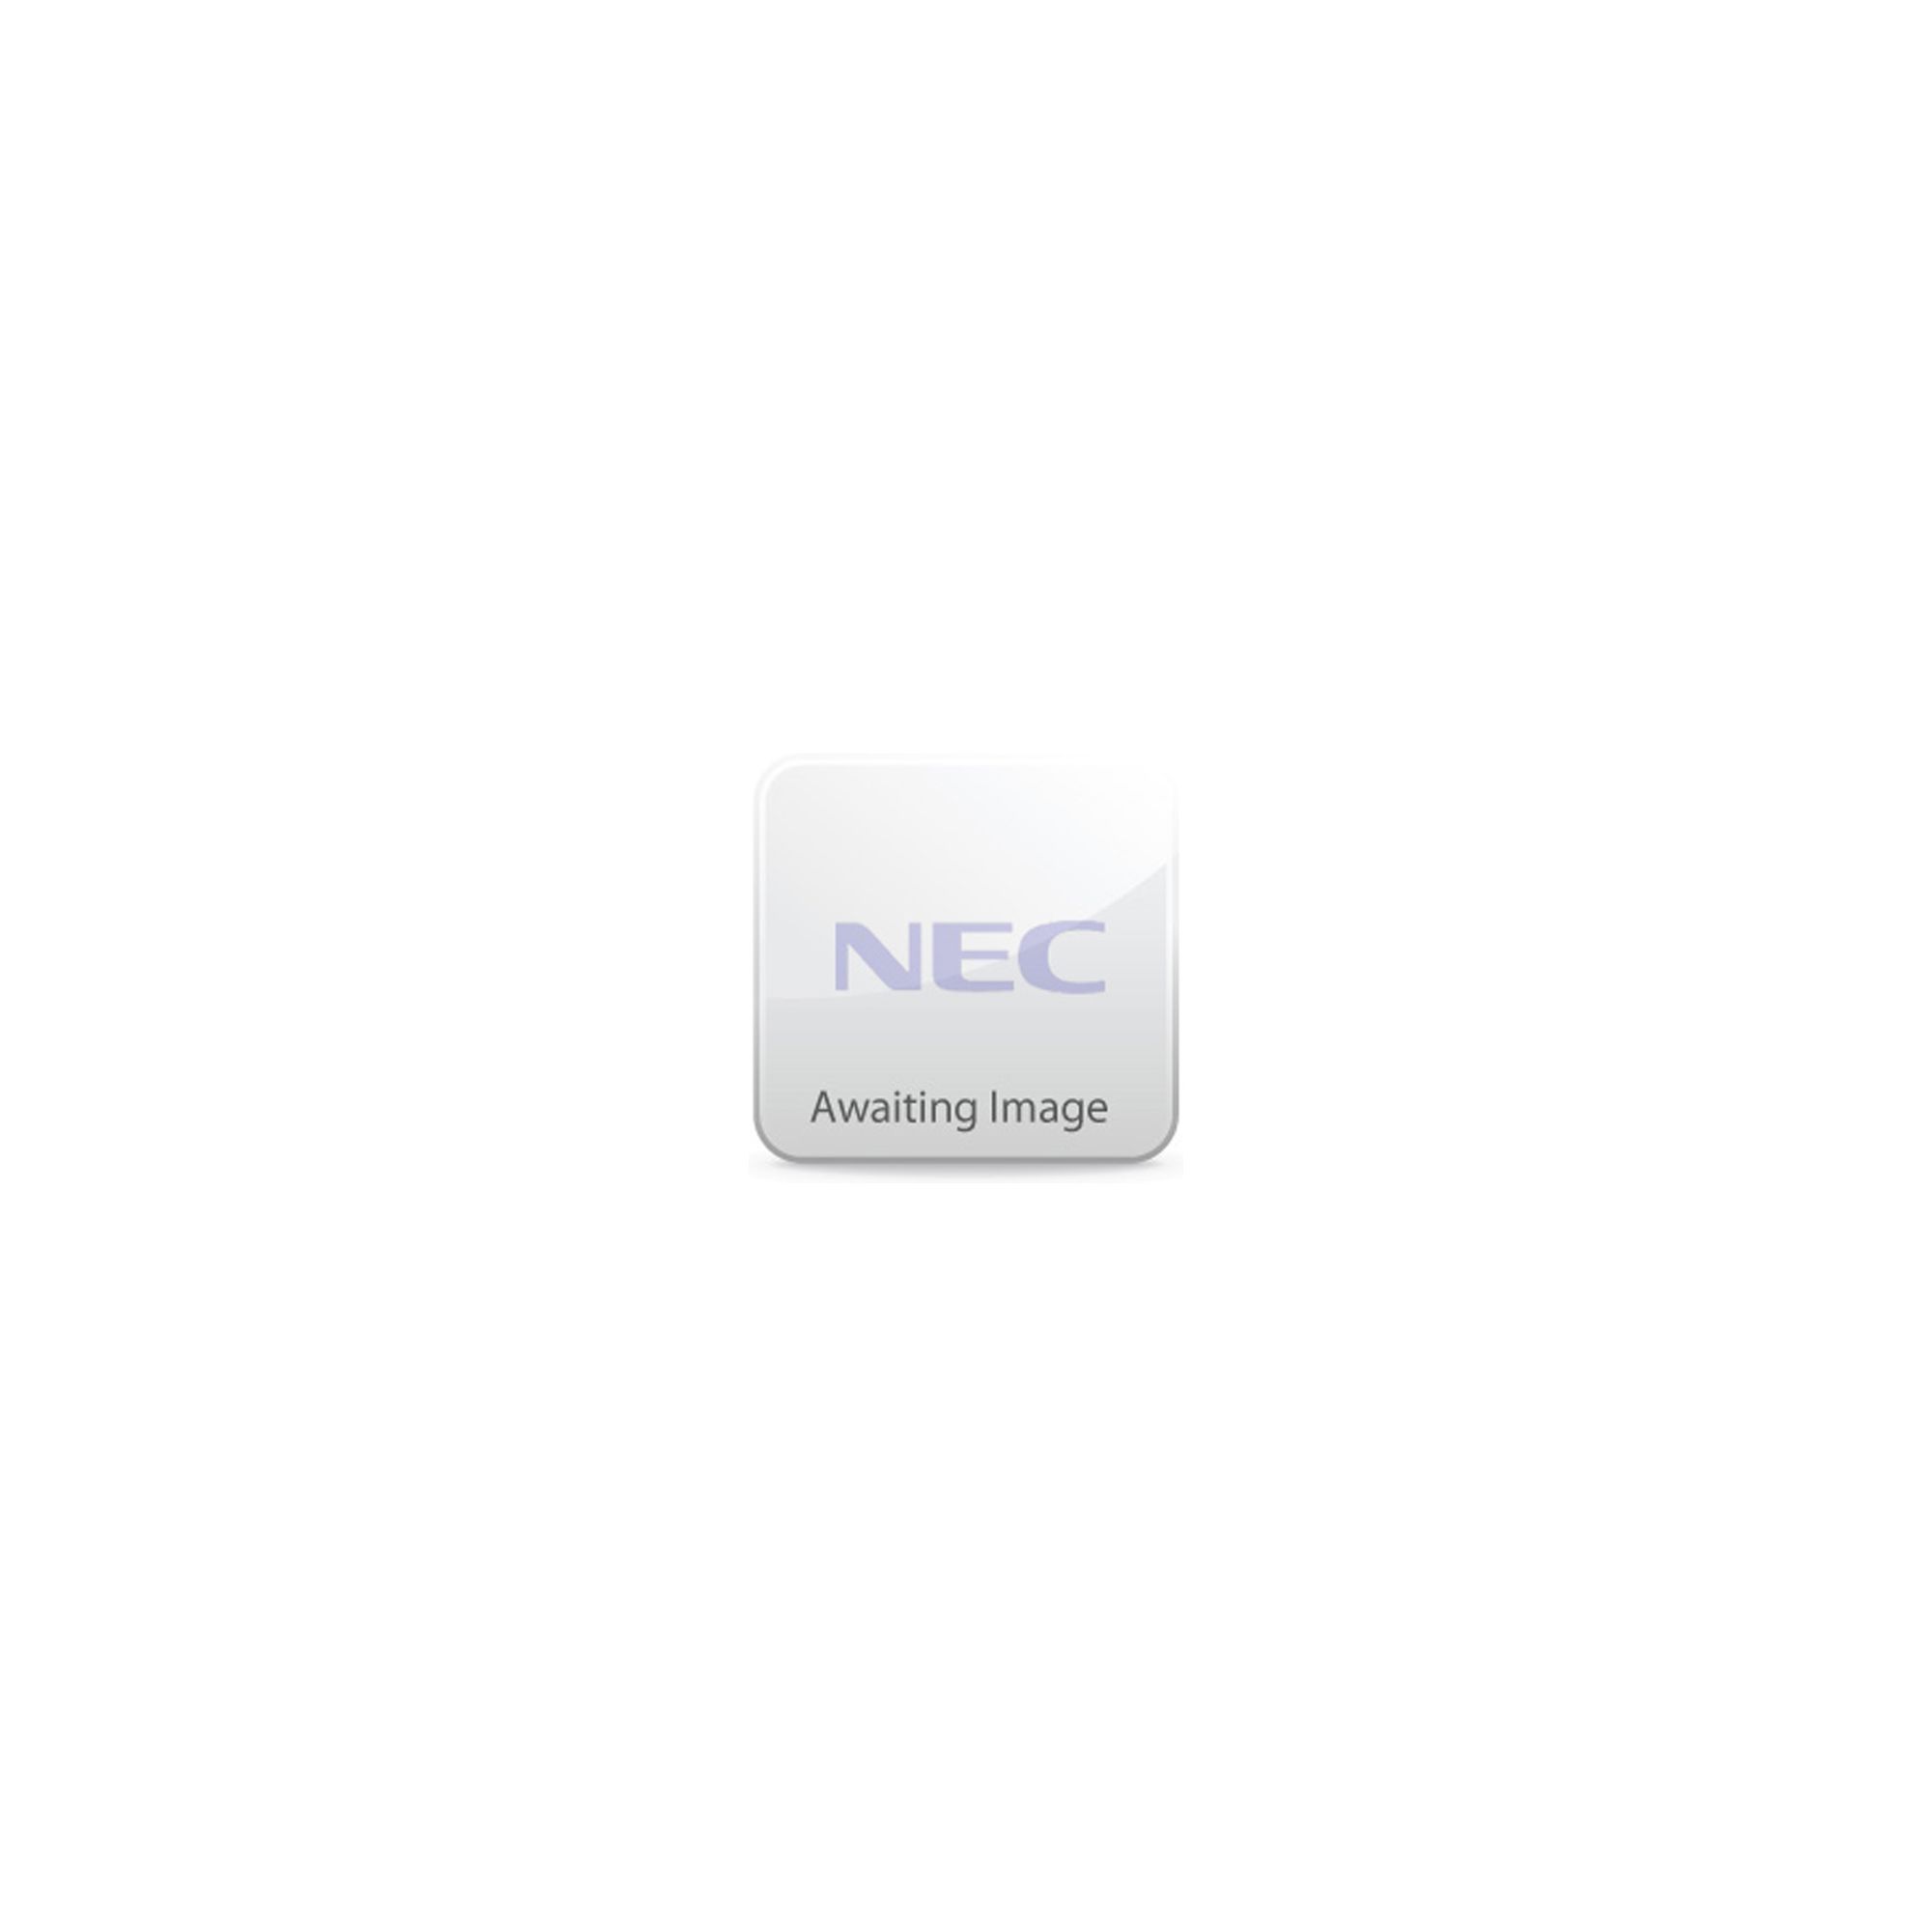 NEC Displays Replacement Projector Lamp for LT25/30 Series at Tescos Direct